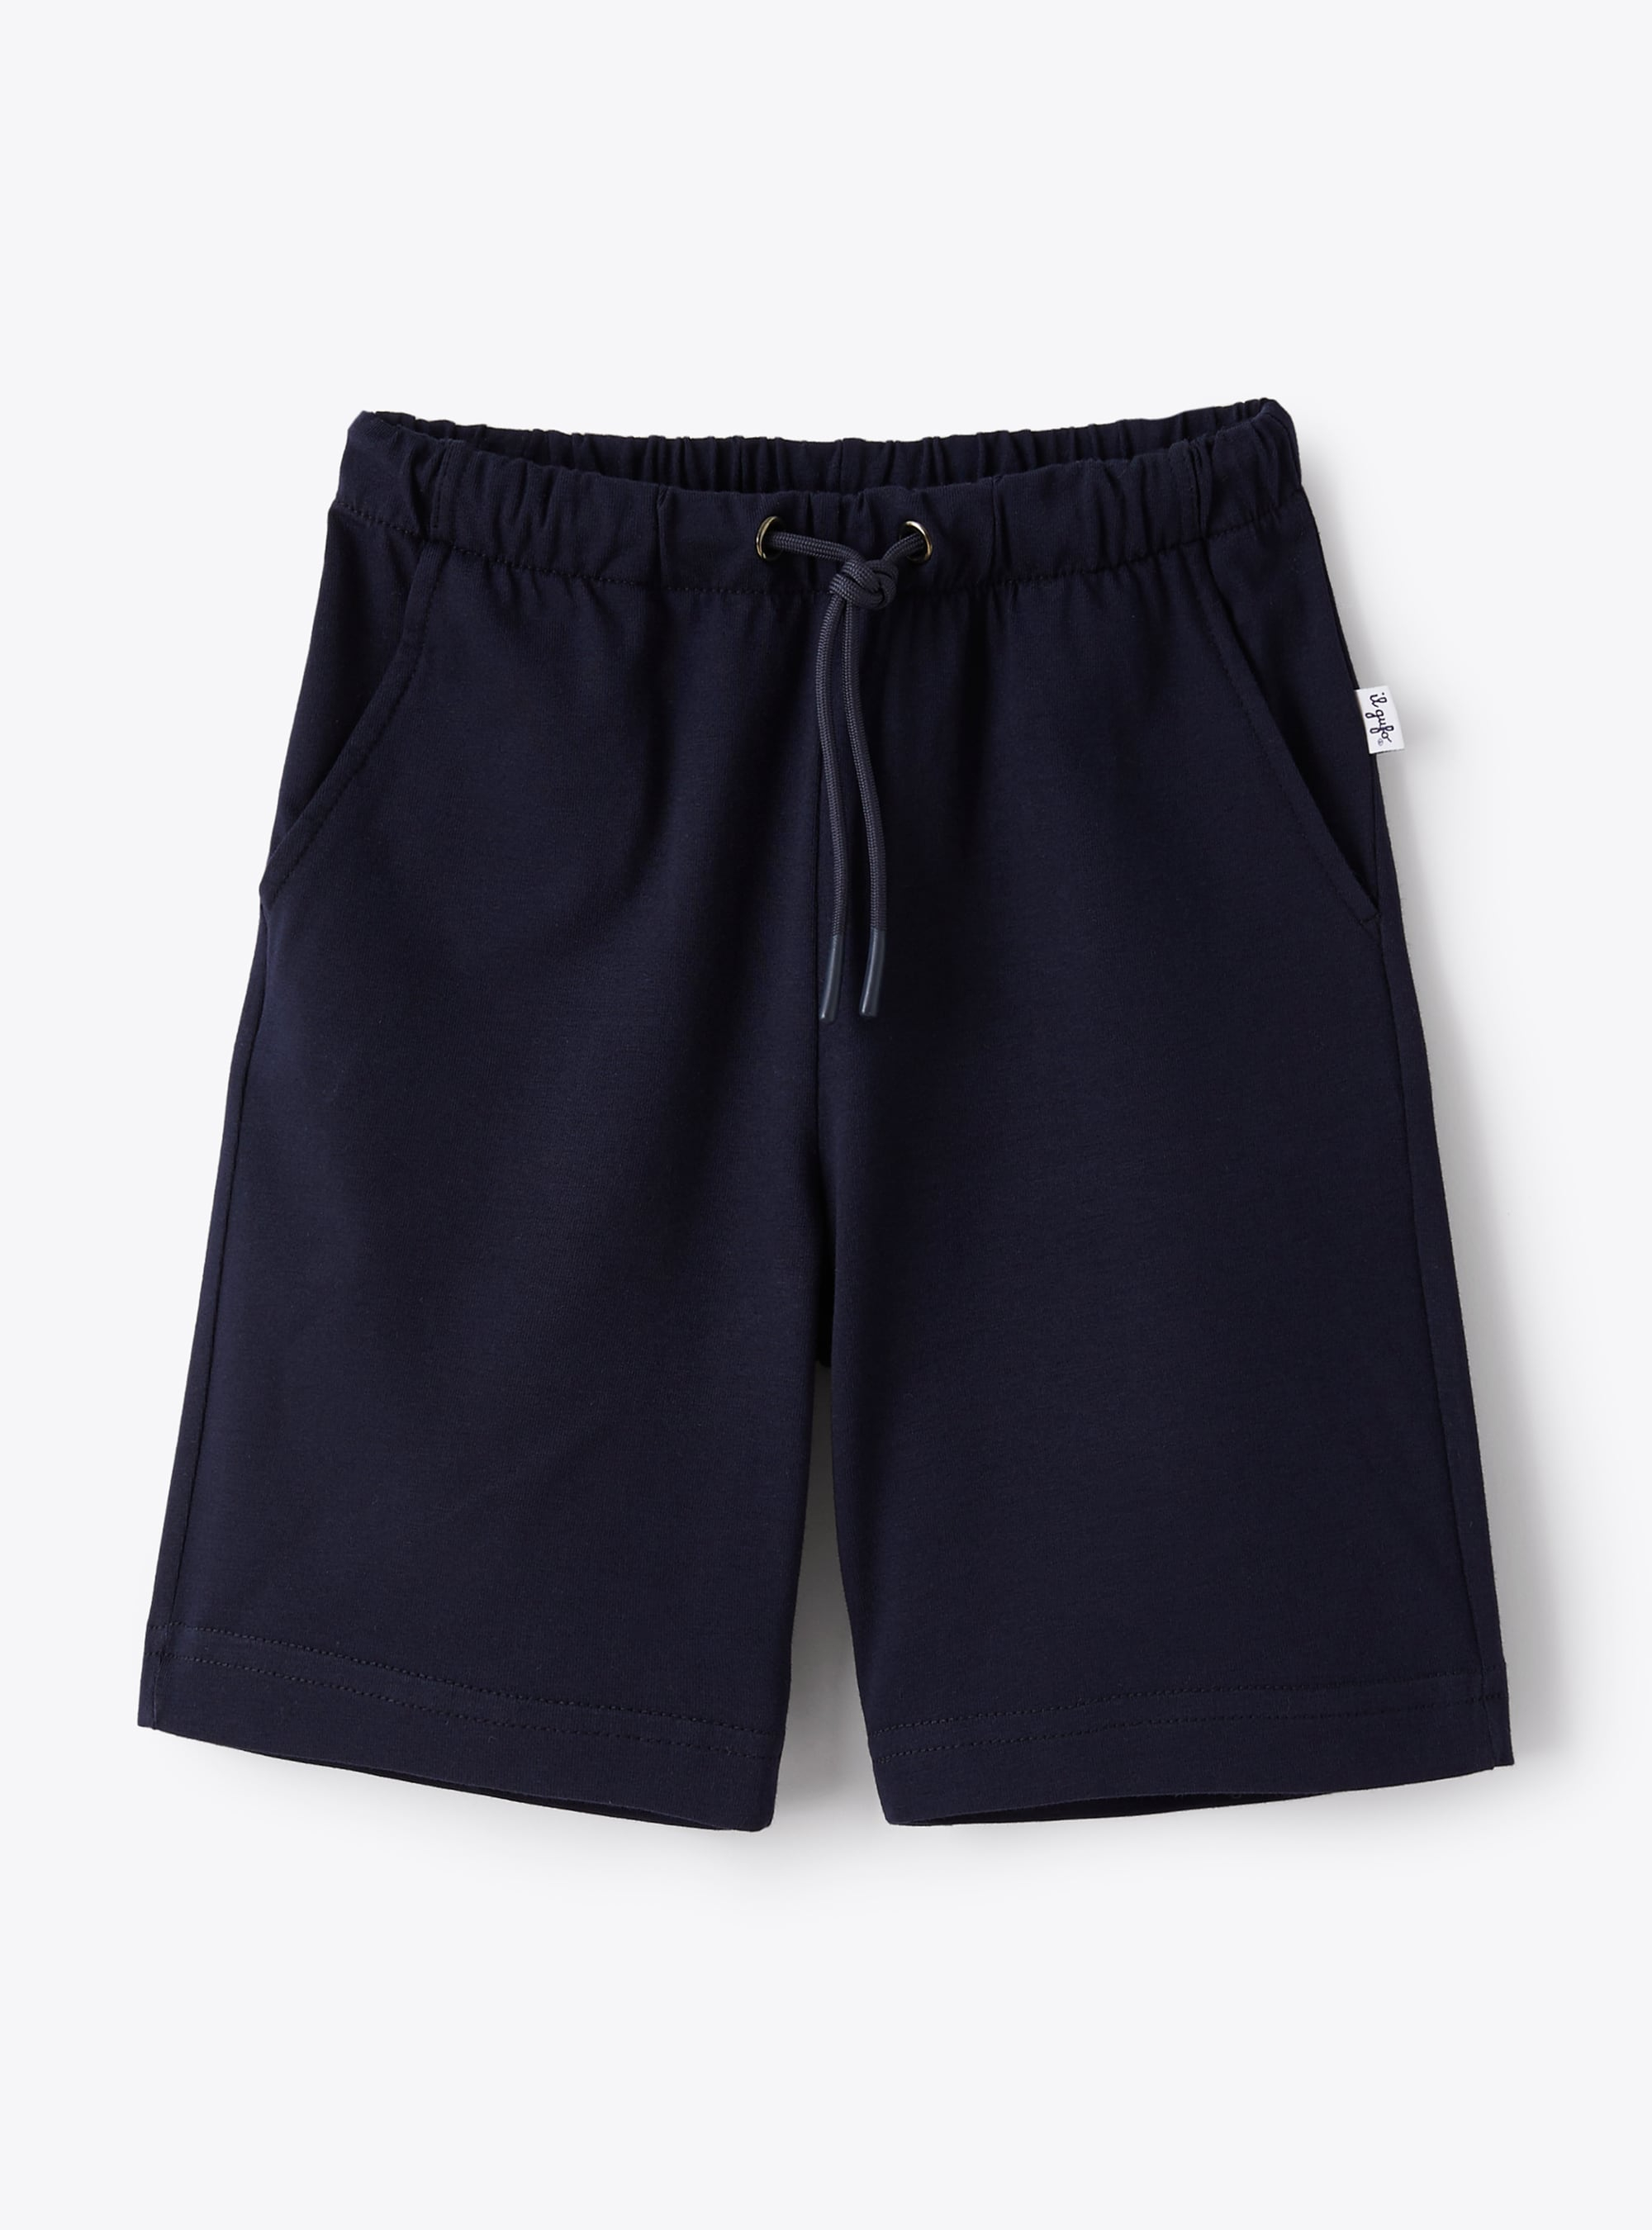 Bermuda shorts in stretchy blue jersey - Trousers - Il Gufo